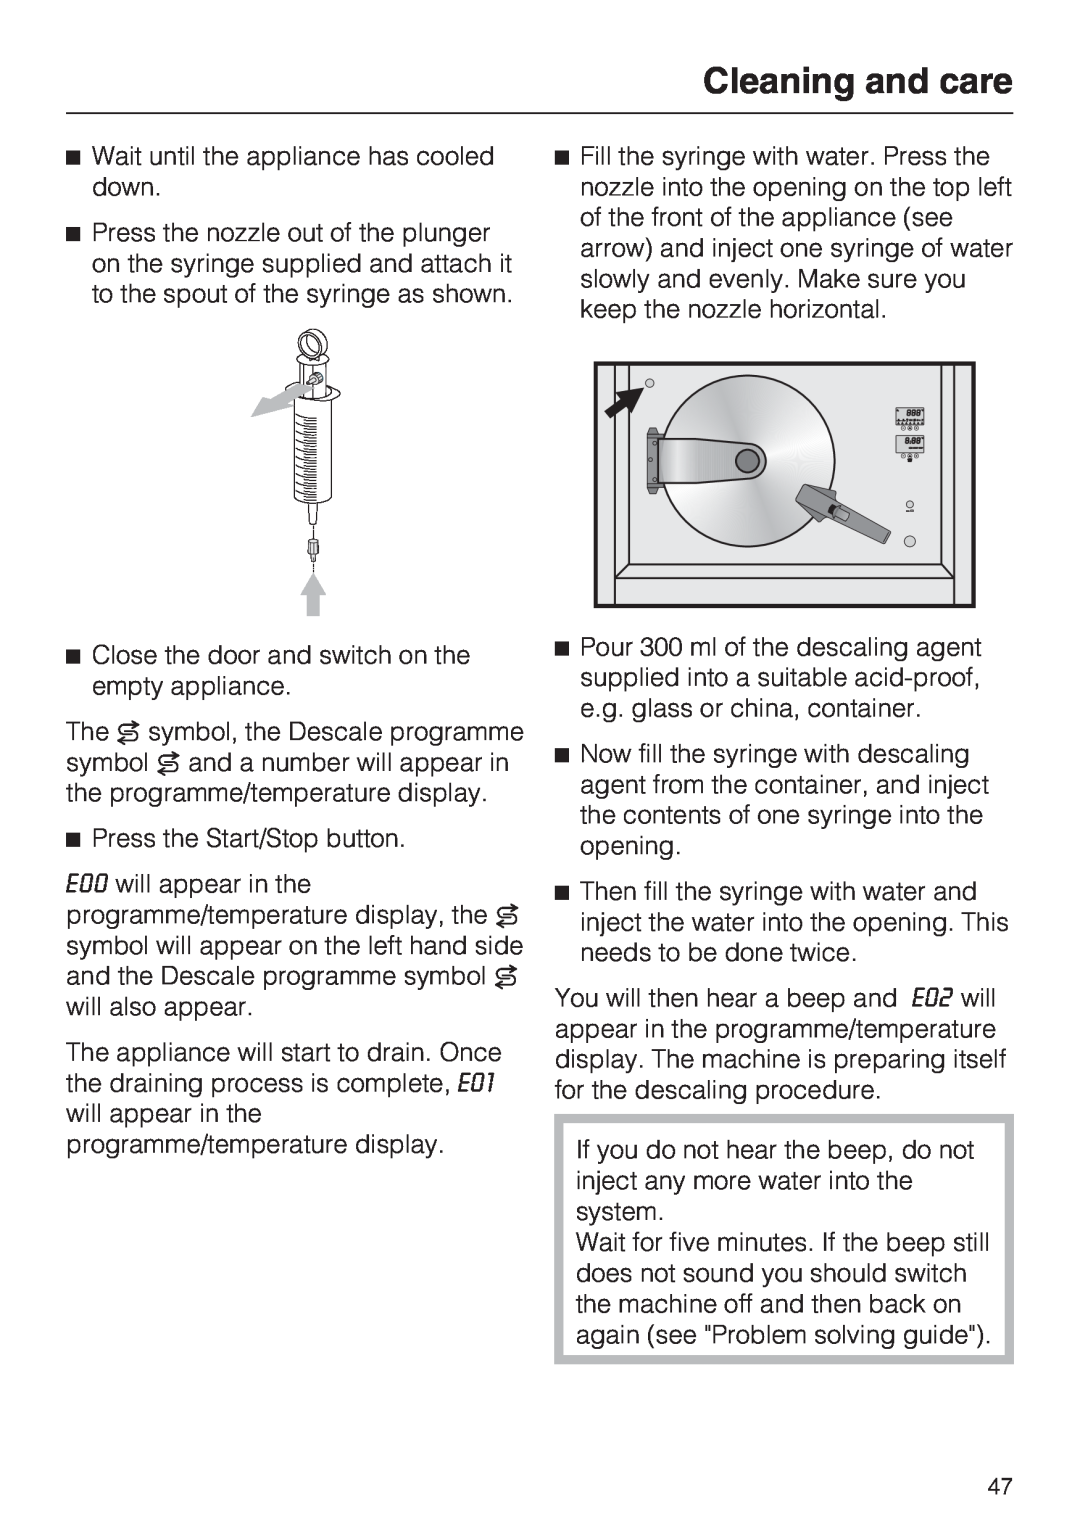 Miele DG 4064 L, DG 4164 L operating instructions Cleaning and care, Wait until the appliance has cooled down 